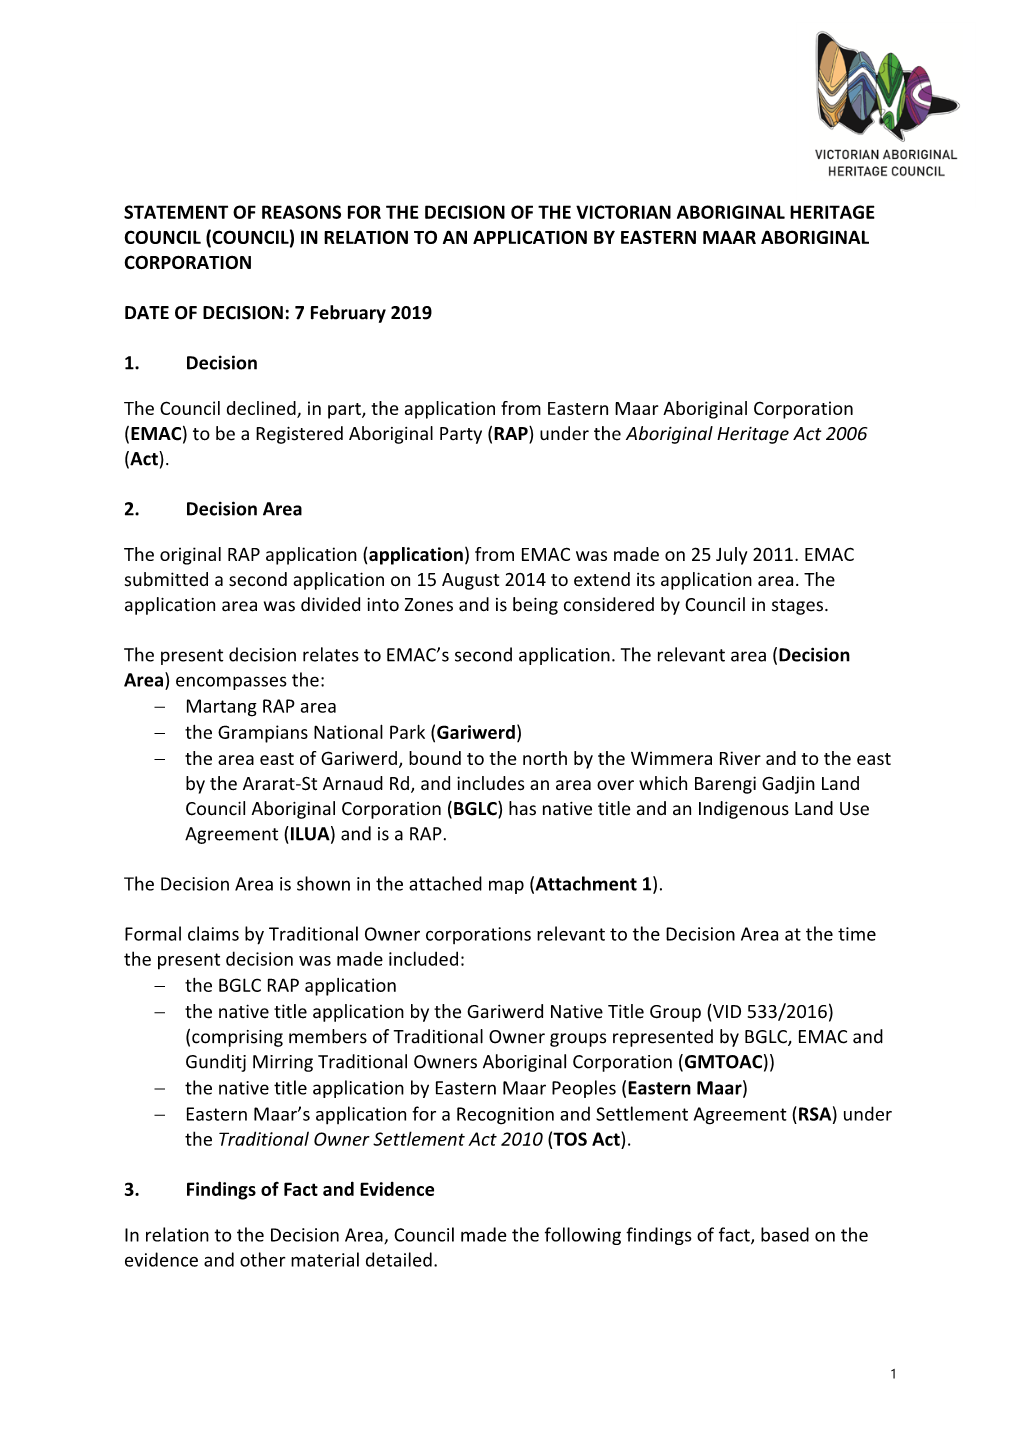 Statement of Reasons for the Decision of the Victorian Aboriginal Heritage Council (Council) in Relation to an Application by Eastern Maar Aboriginal Corporation